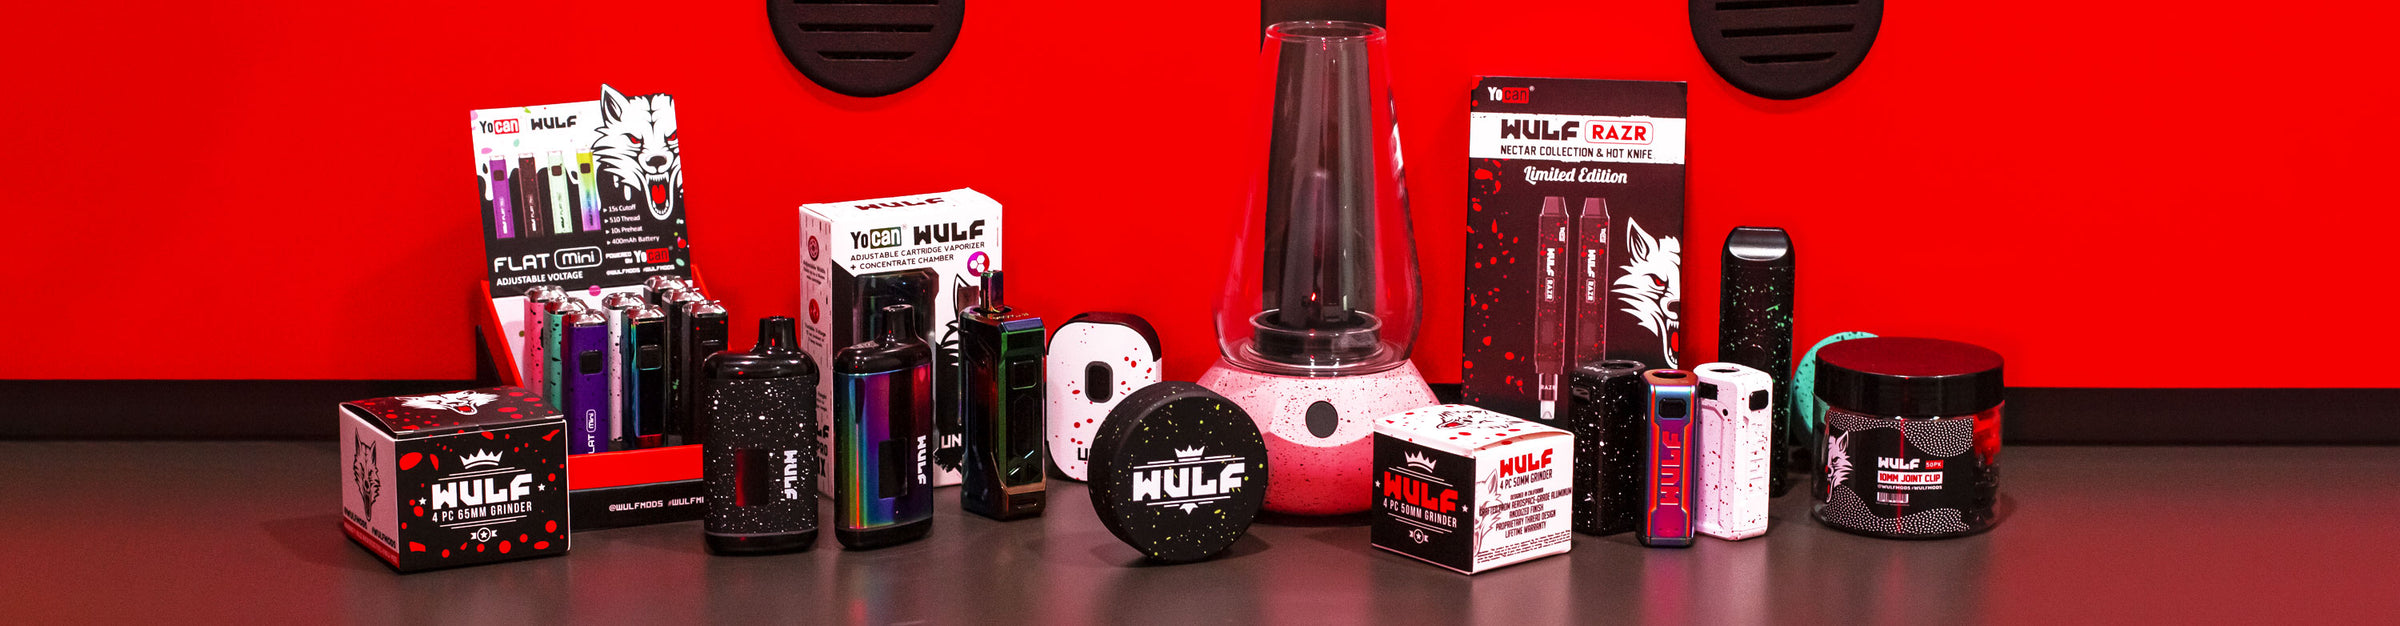 Got Vape Retail Wulf Mods Collection standing on black display in front of red background